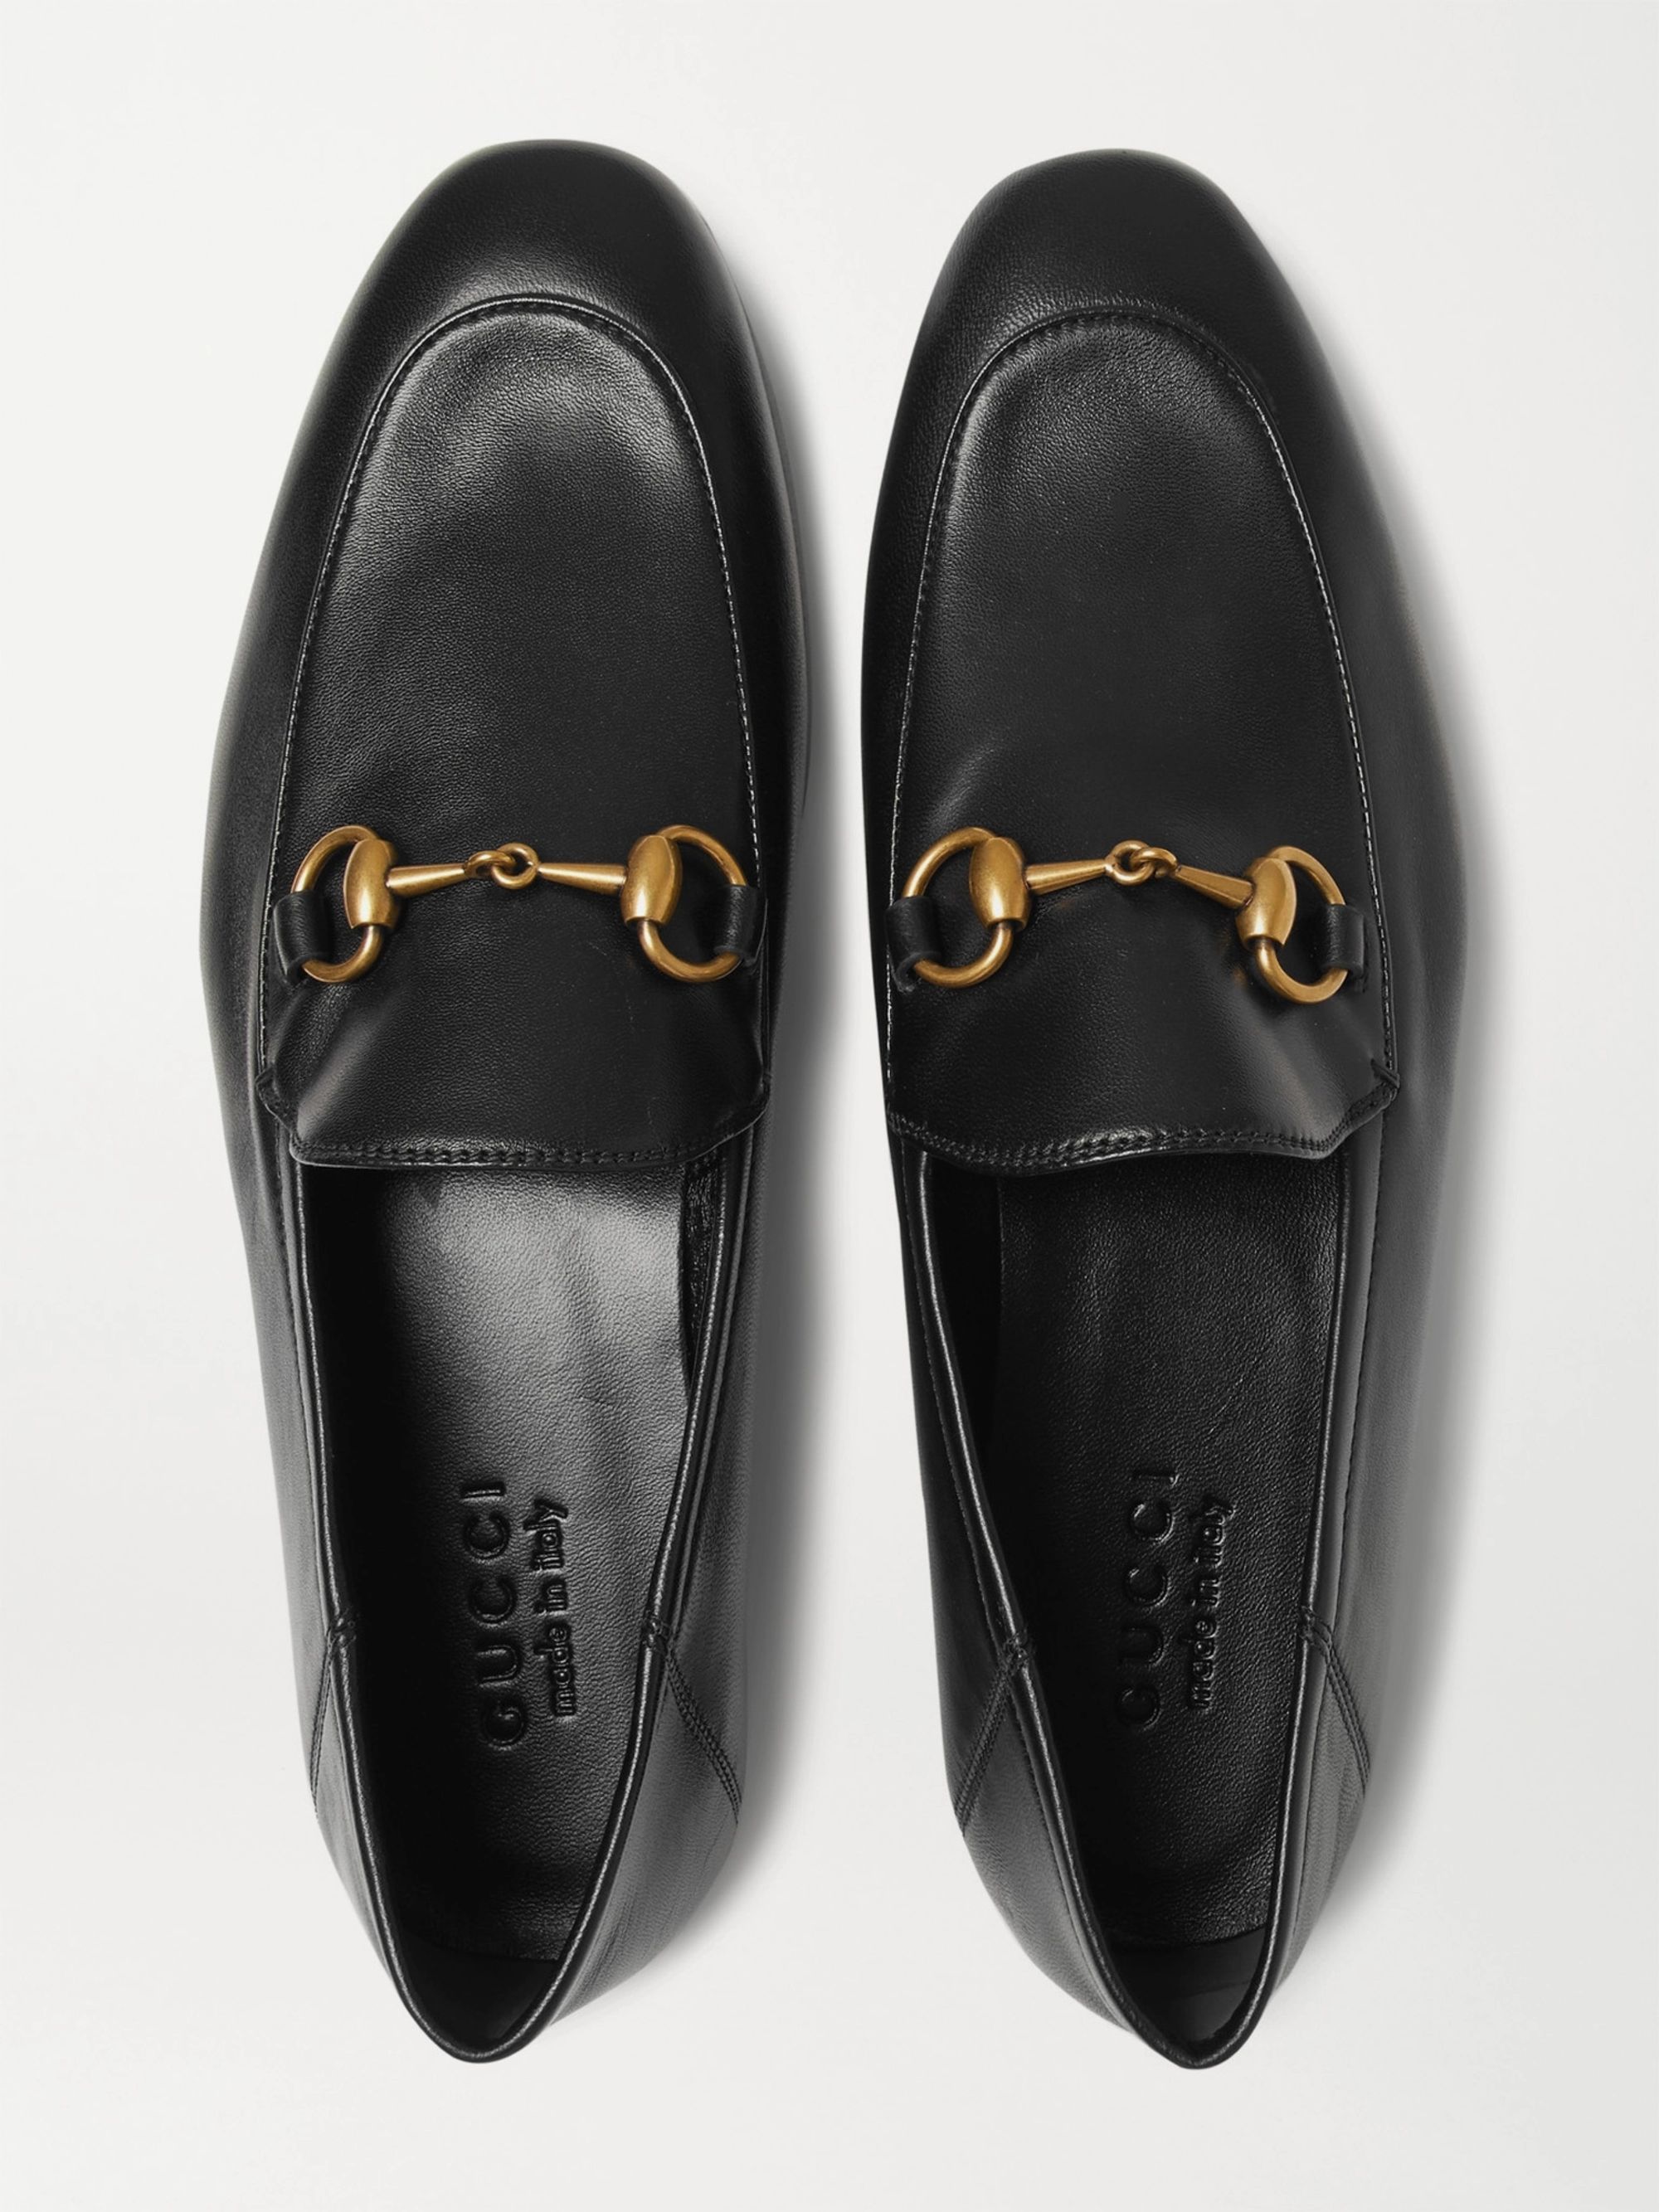 Black Brixton Horsebit Collapsible-Heel Leather Loafers | Gucci | MR PORTER